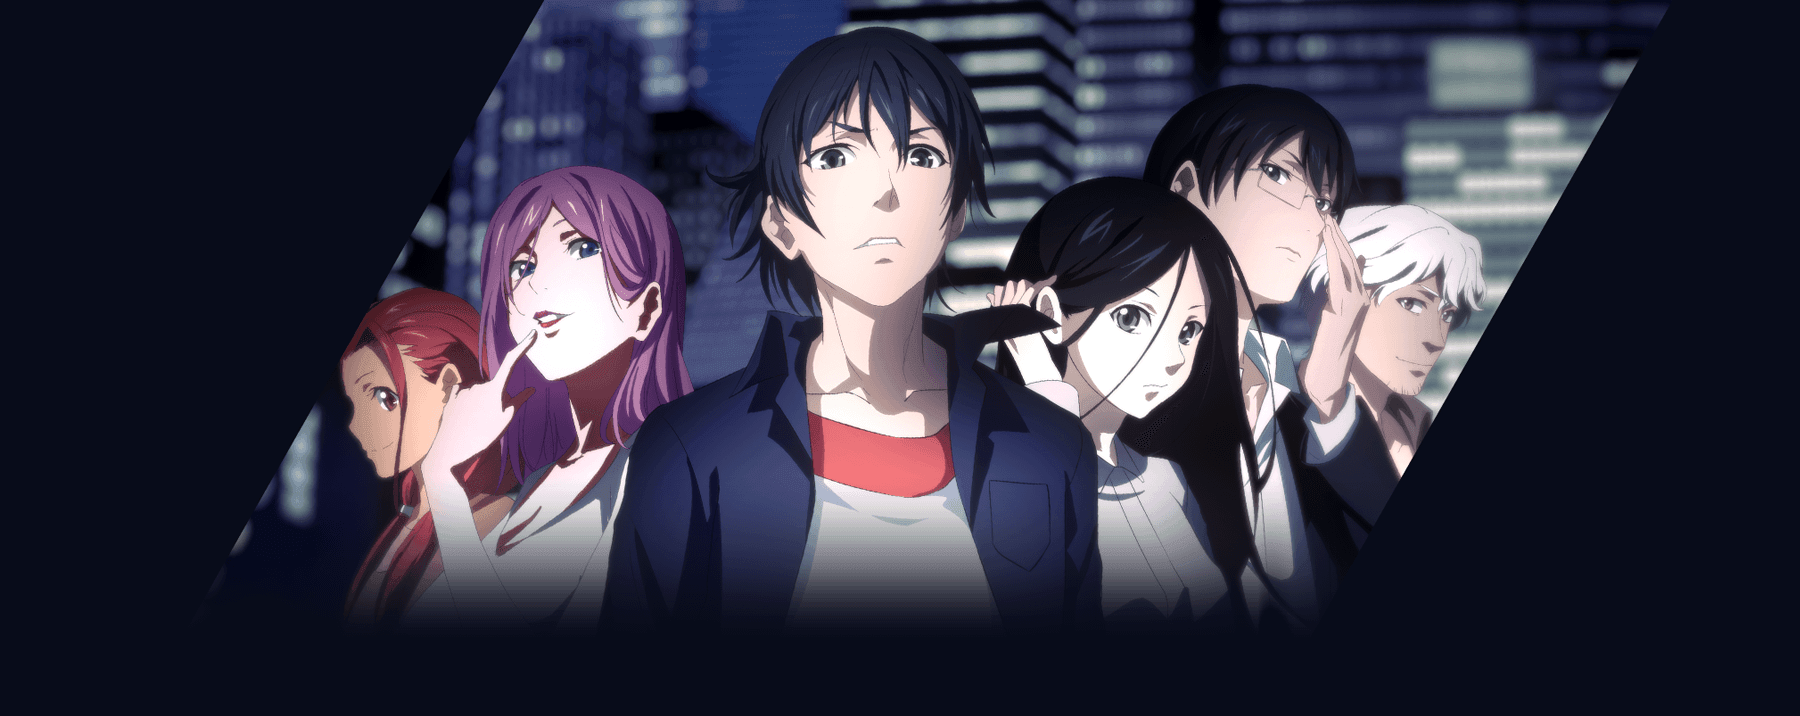 How to Watch Hitori no Shita – The Outcast anime? Easy Watch Order